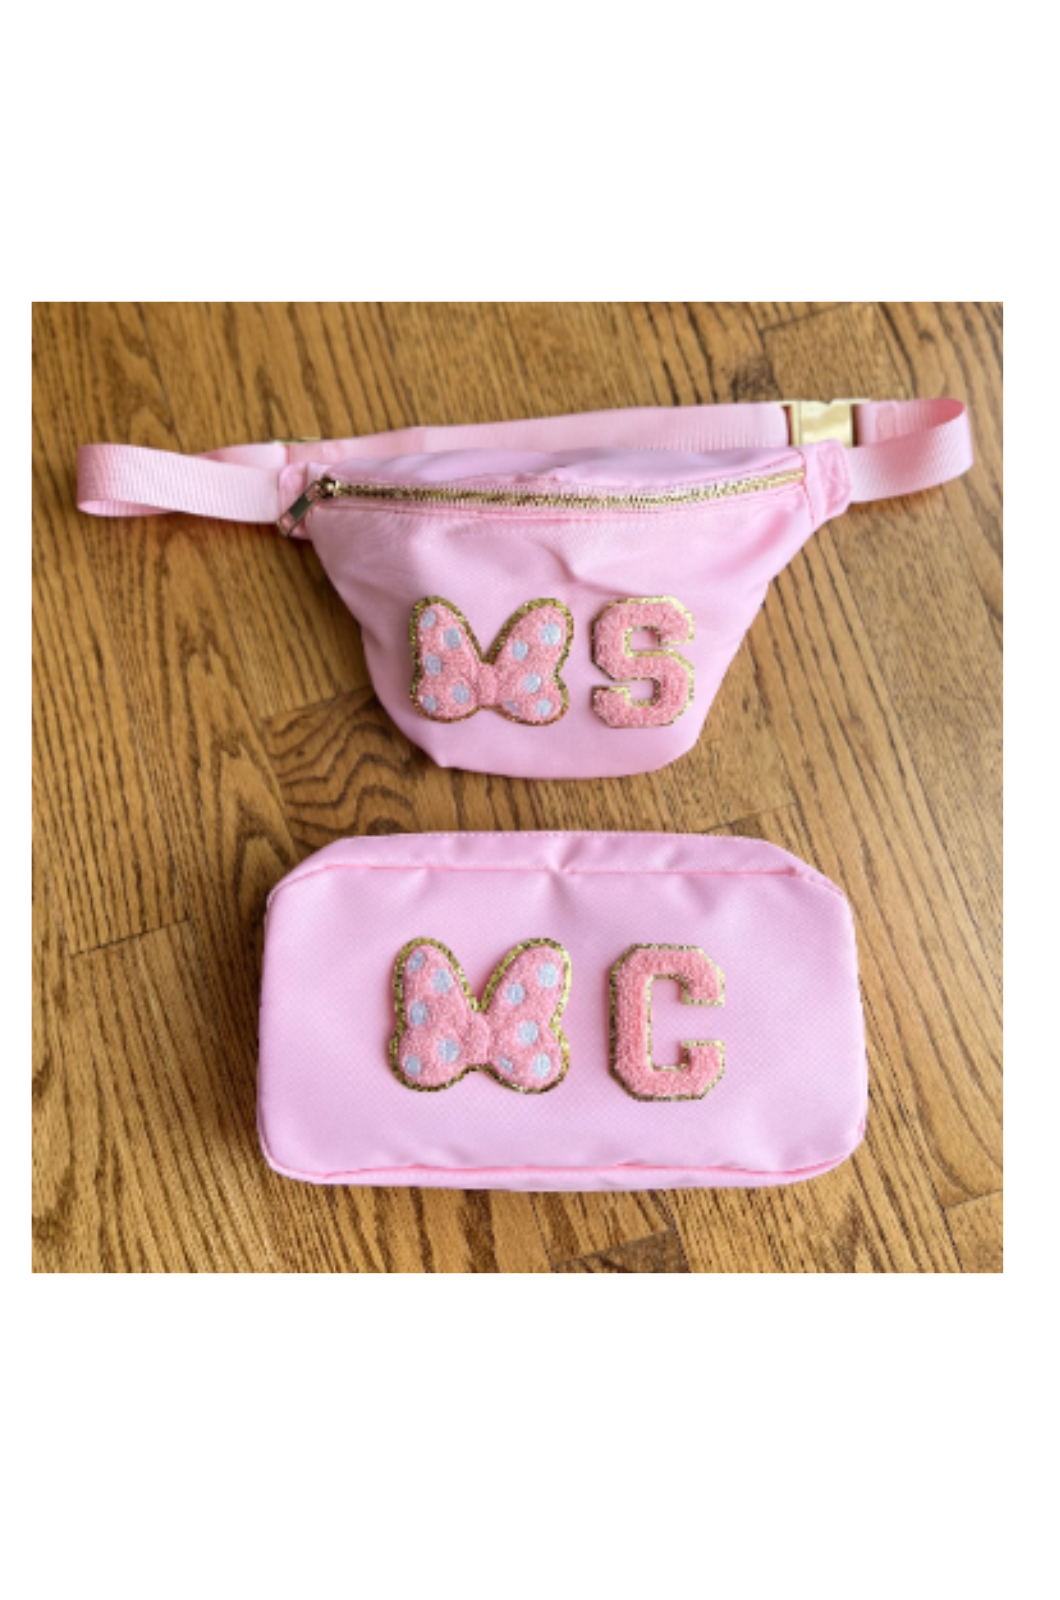 Chenille Bow and Initial Fanny Pack